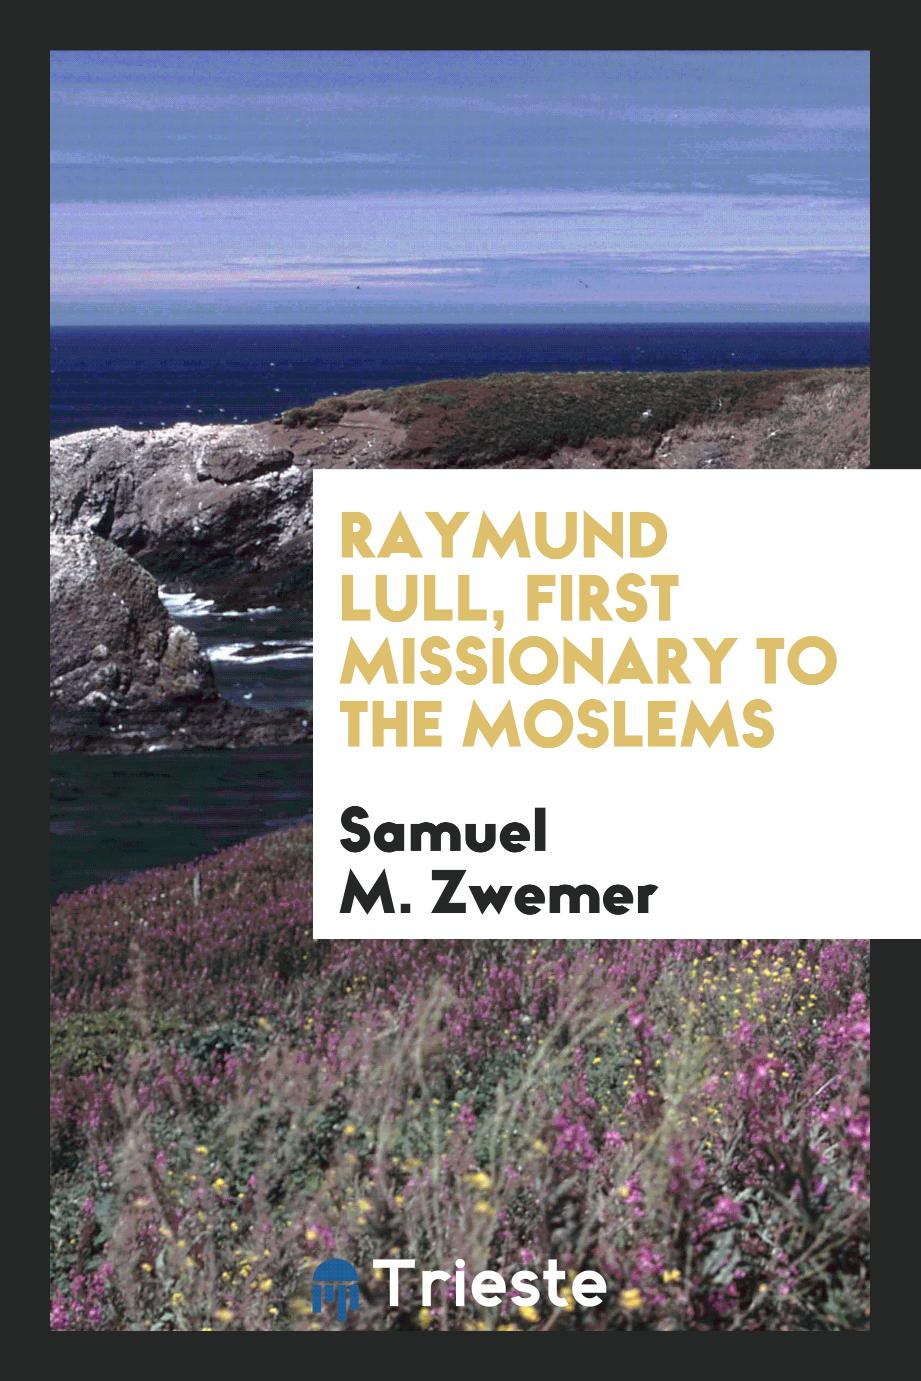 Raymund Lull, first missionary to the Moslems